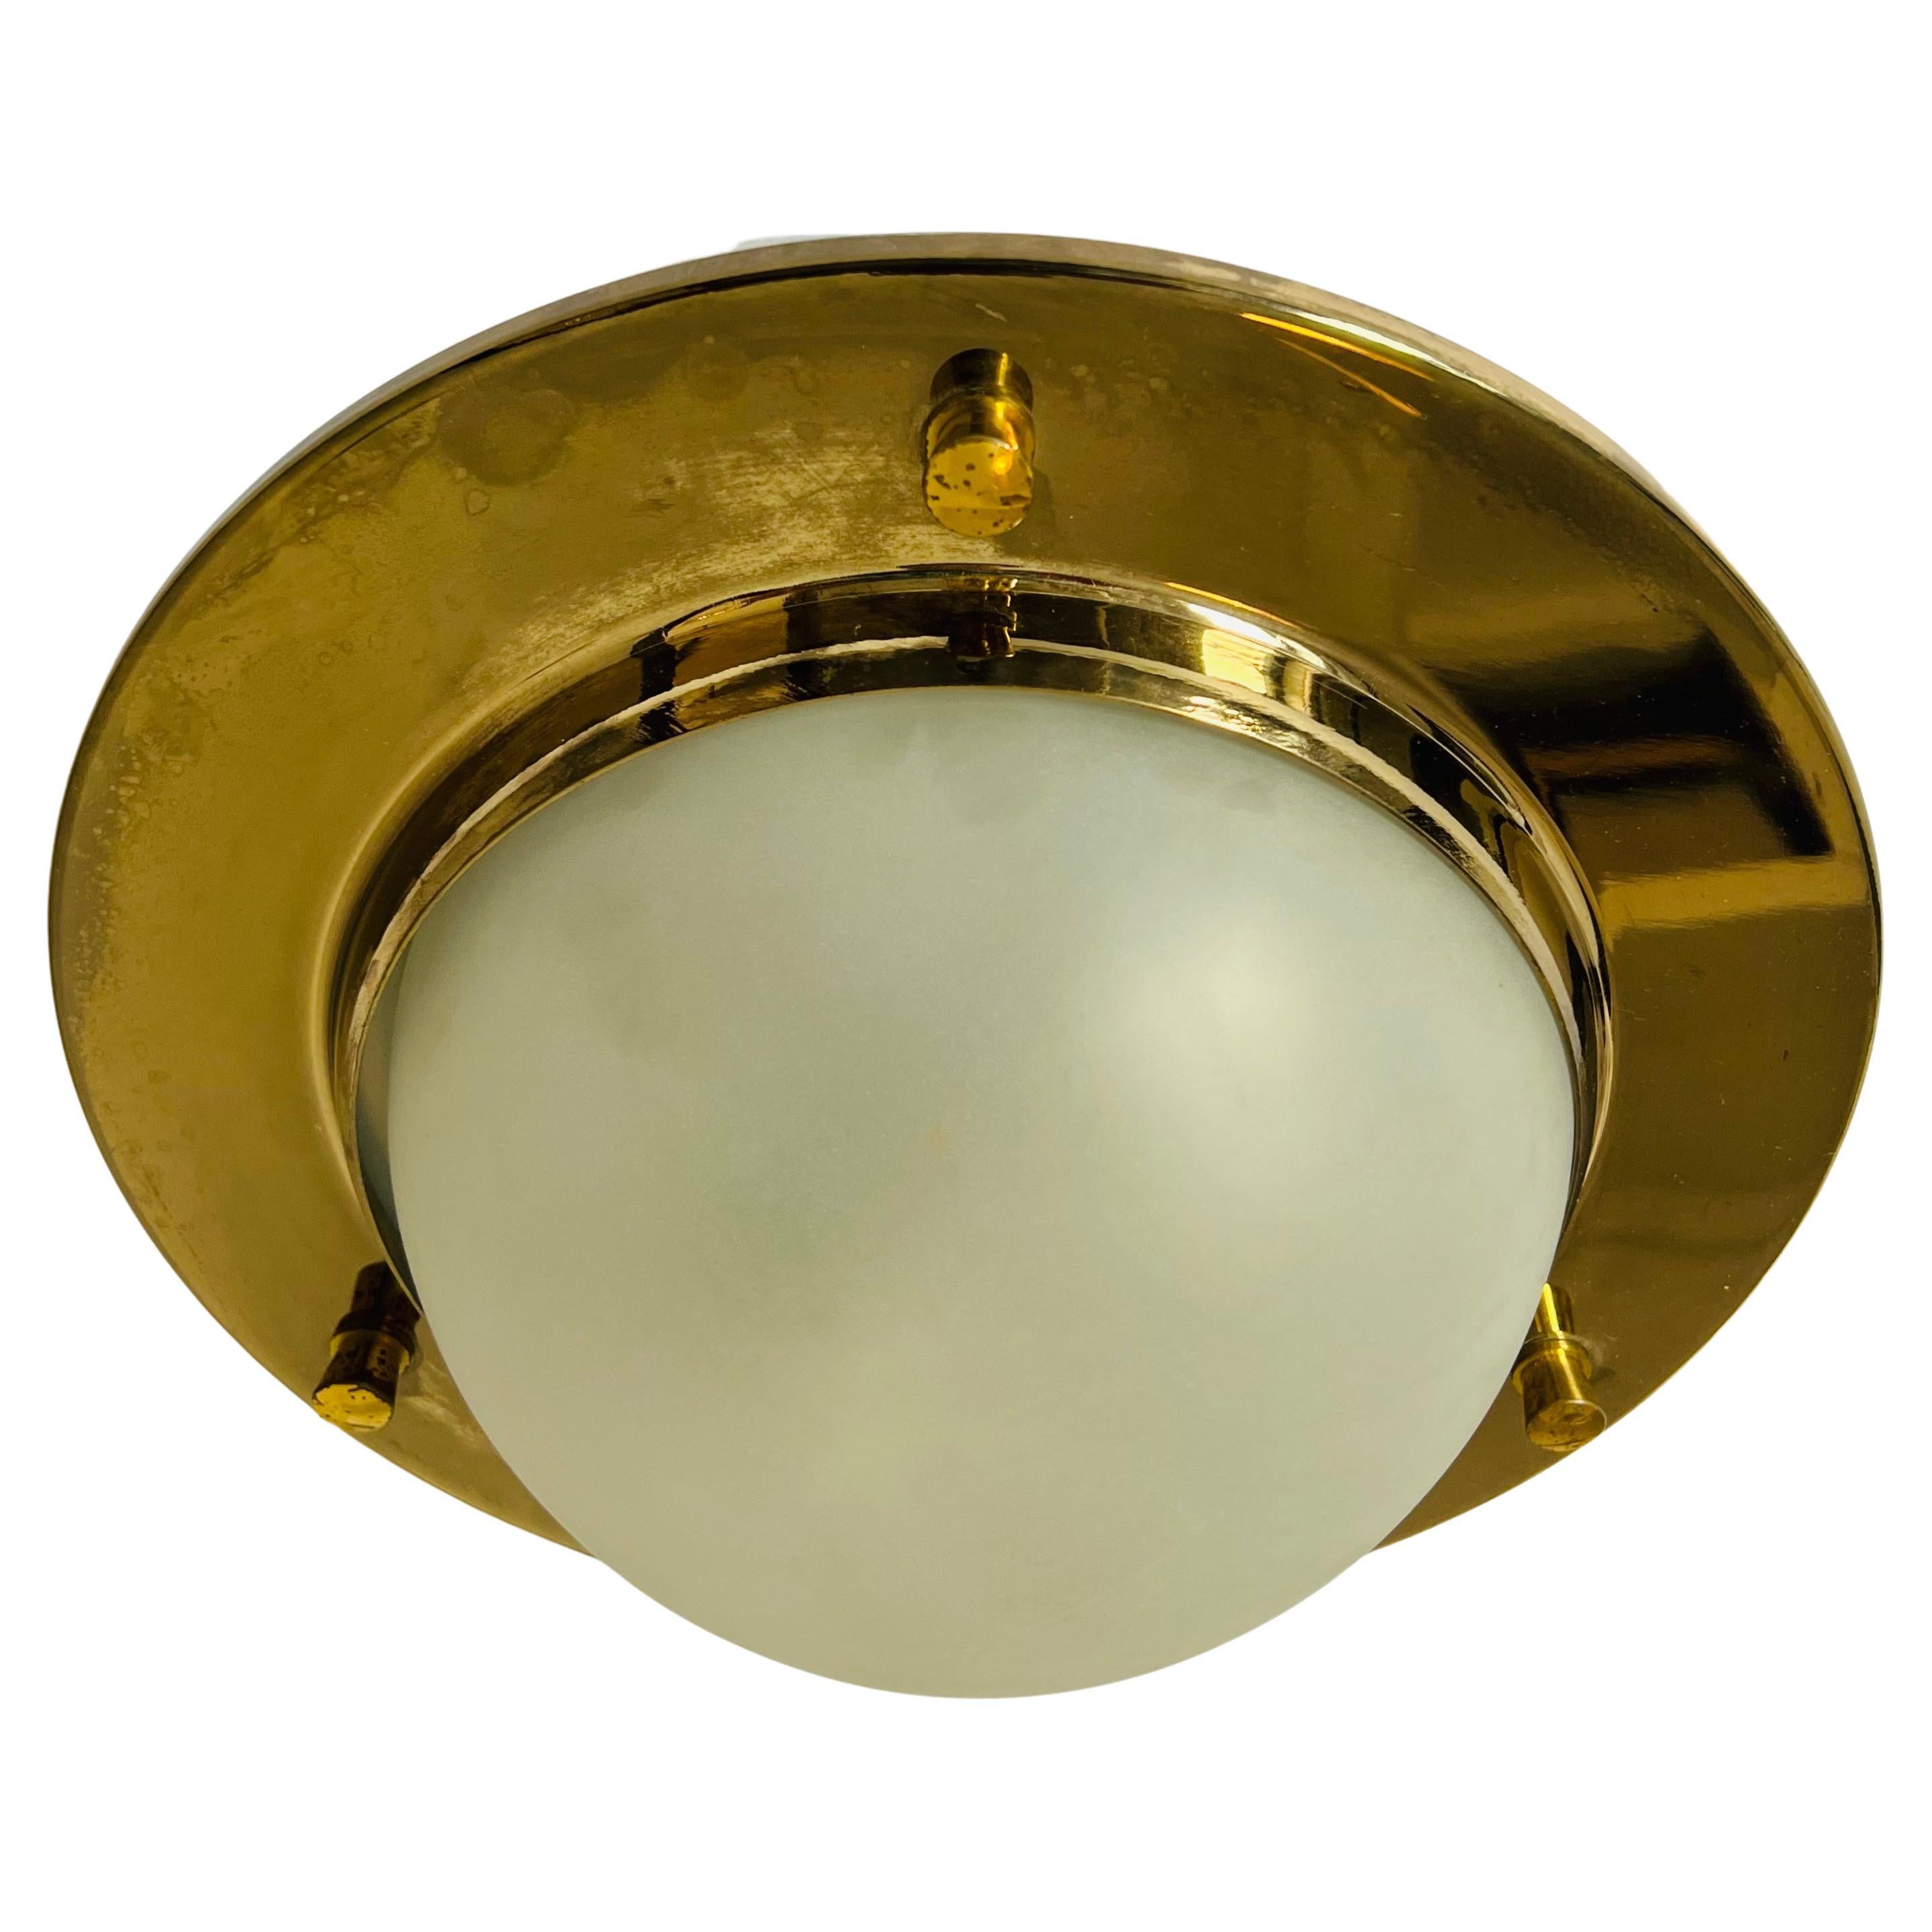 A wonderful Nautical style aged polished brass flush light with a frosted glass dome shade by Italian maker, Azucena. Rewired.